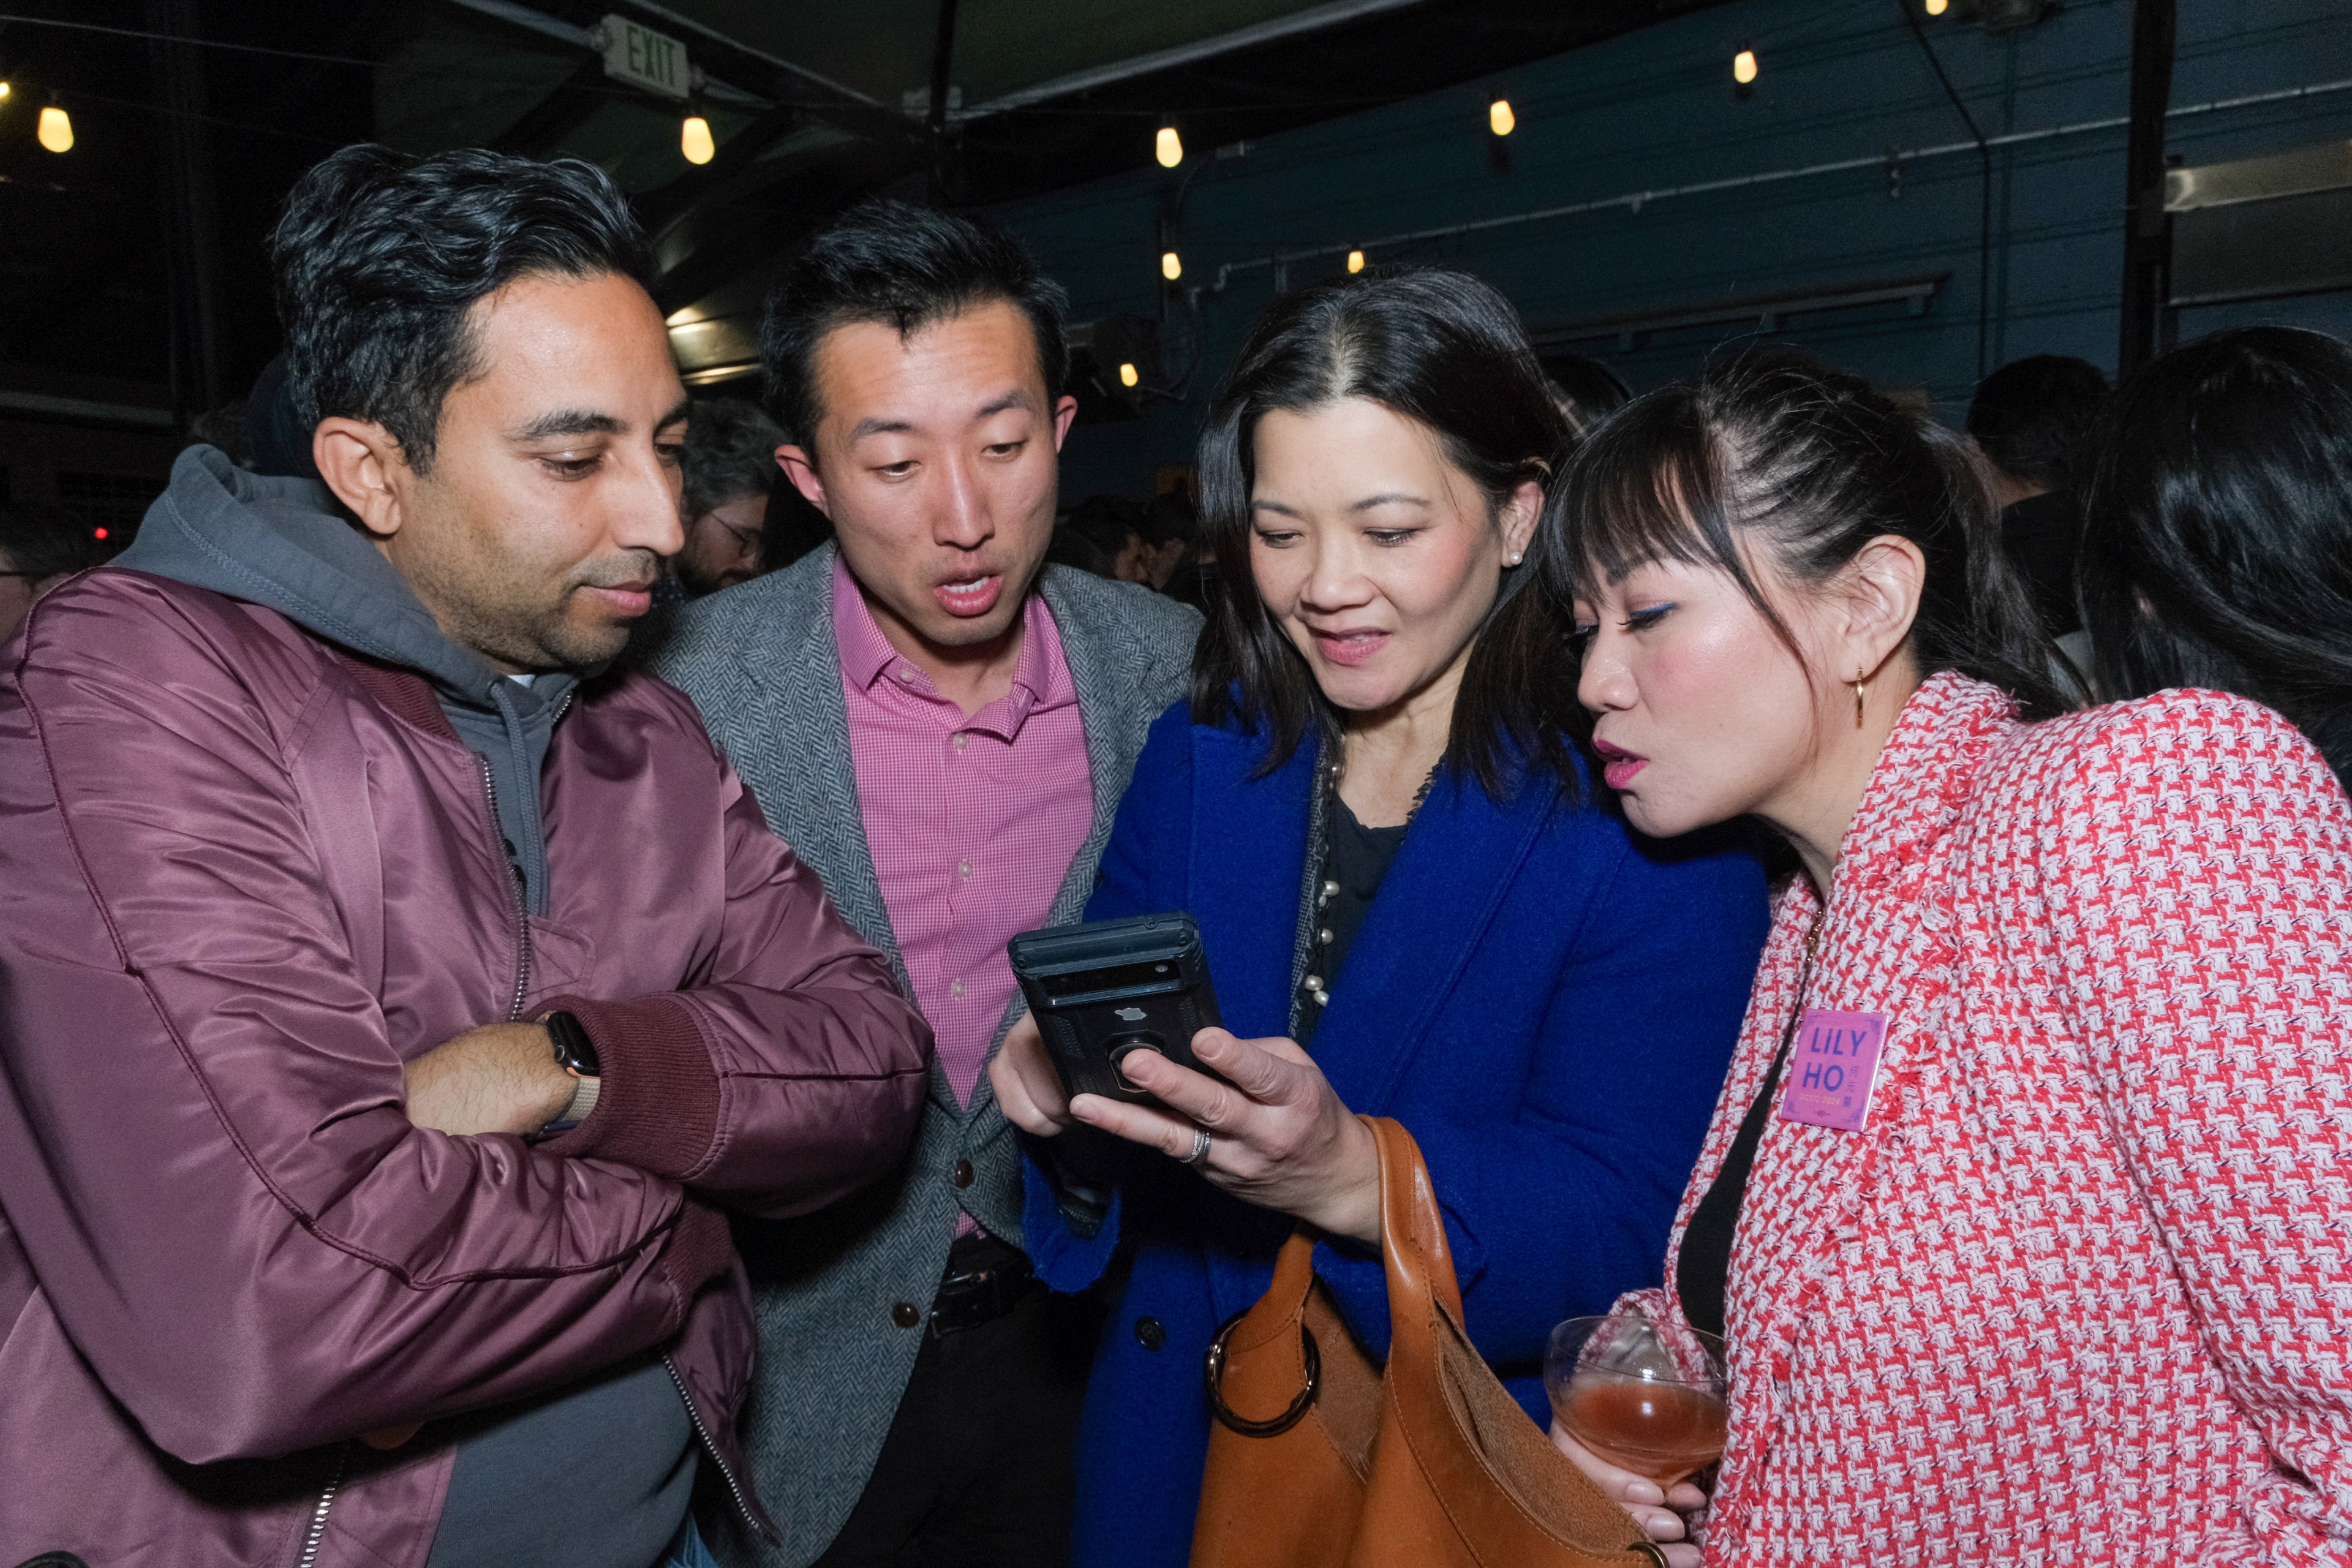 Four people are closely gathered, looking intently at a smartphone that one of them is holding. They appear engaged and curious.